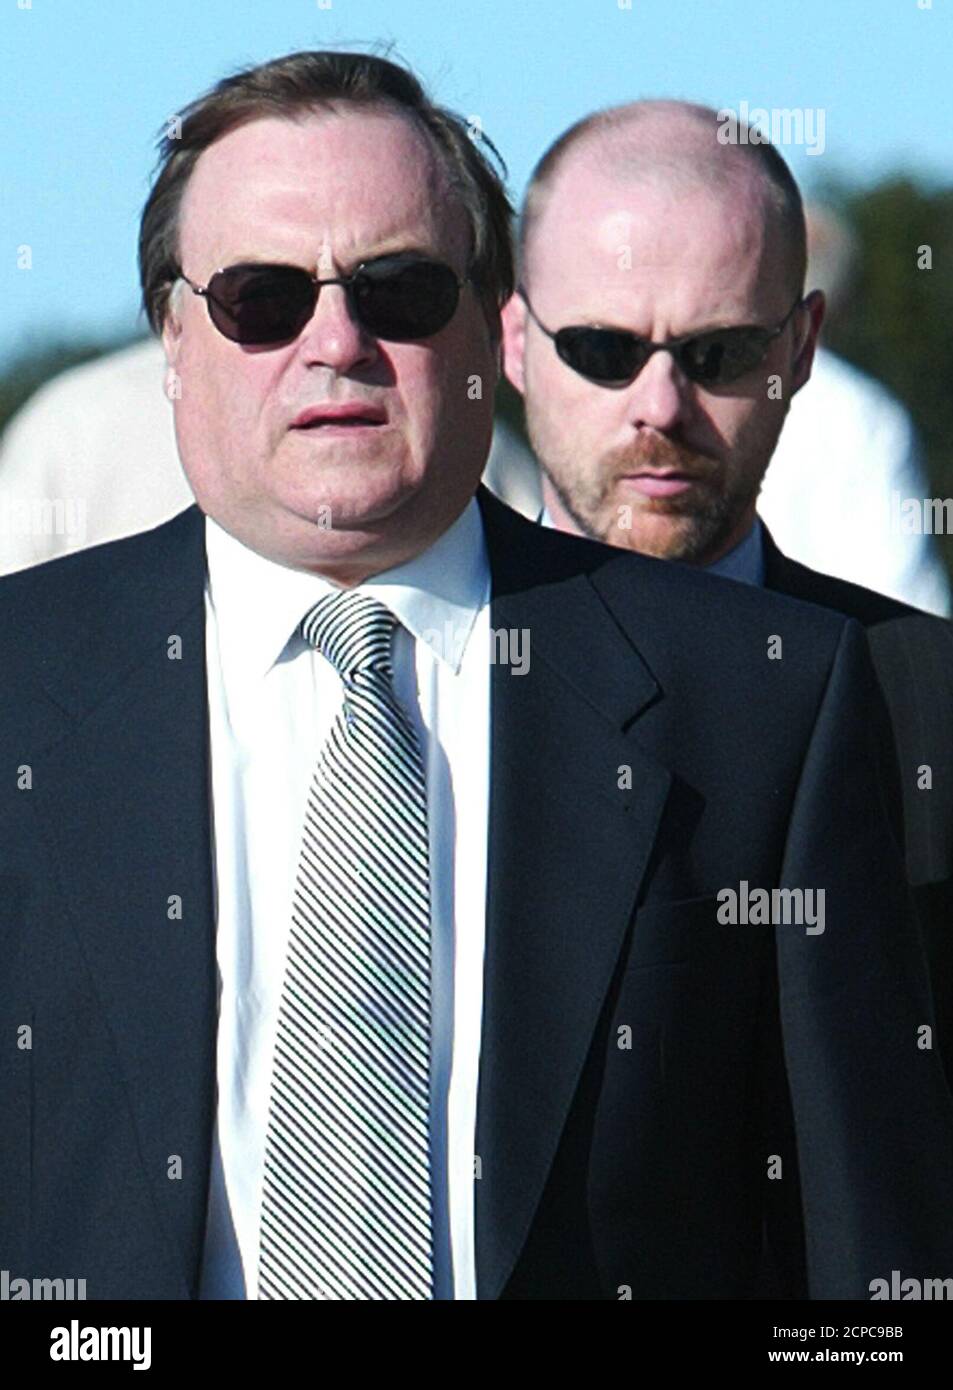 Britain's Deputy Prime Minister John Prescott (L) wears sunglasses as he walks with an aide in the early morning sunshine on the second day of the Labour Party conference in Bournemouth, September 29, 2003. REUTERS/Stephen Hird  RUS/ASA Stock Photo